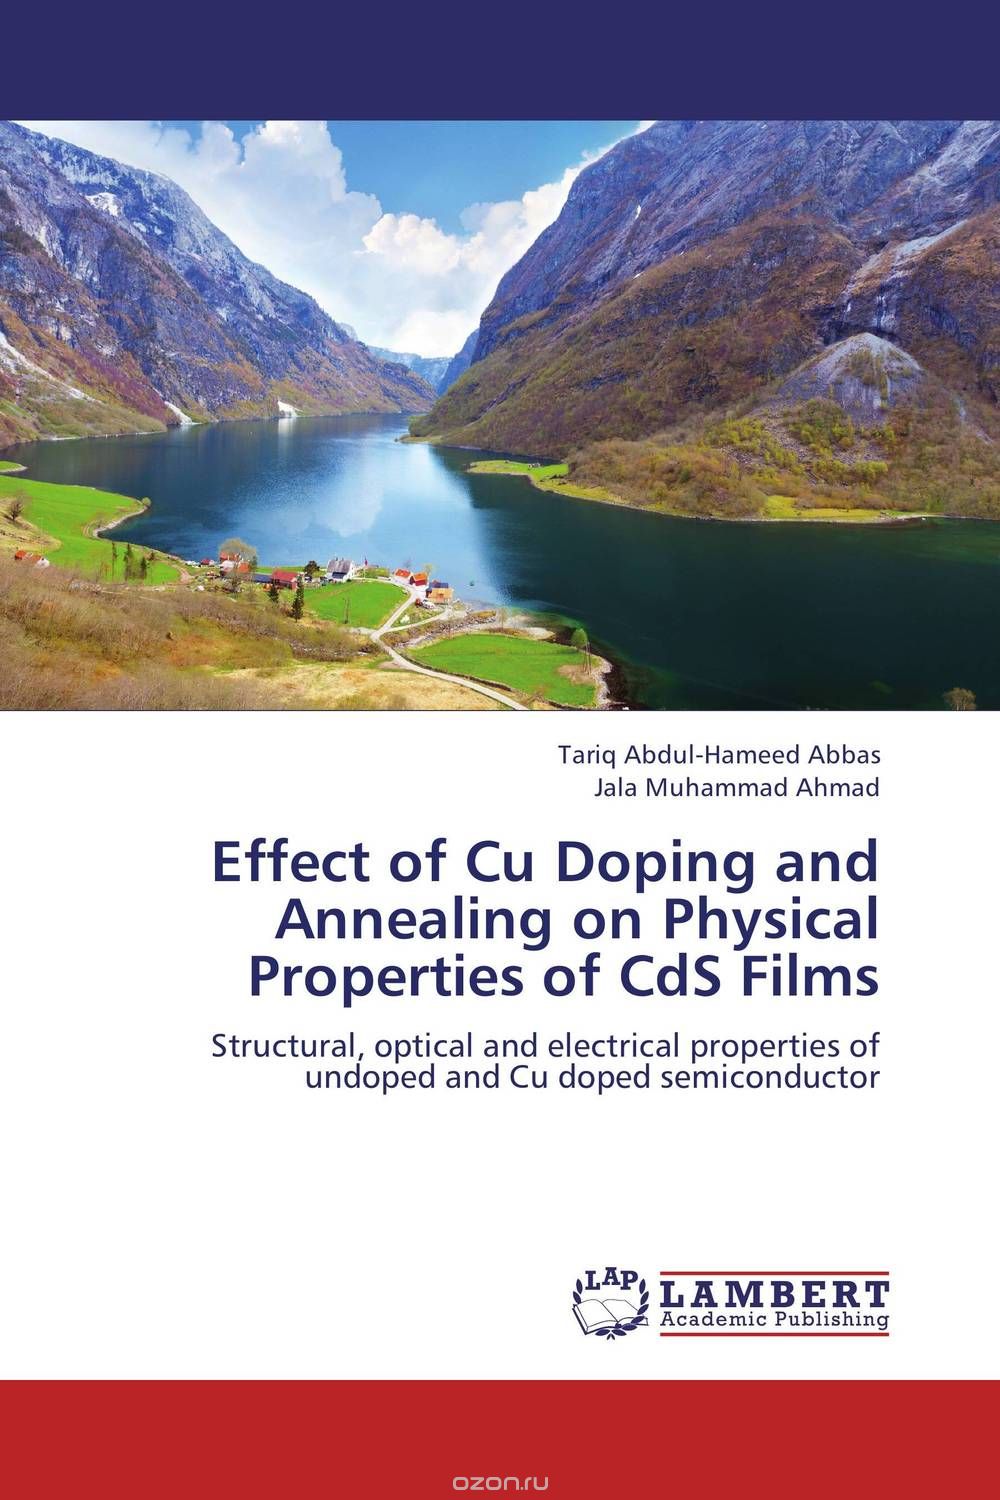 Скачать книгу "Effect of Cu Doping and Annealing on Physical Properties of CdS Films"